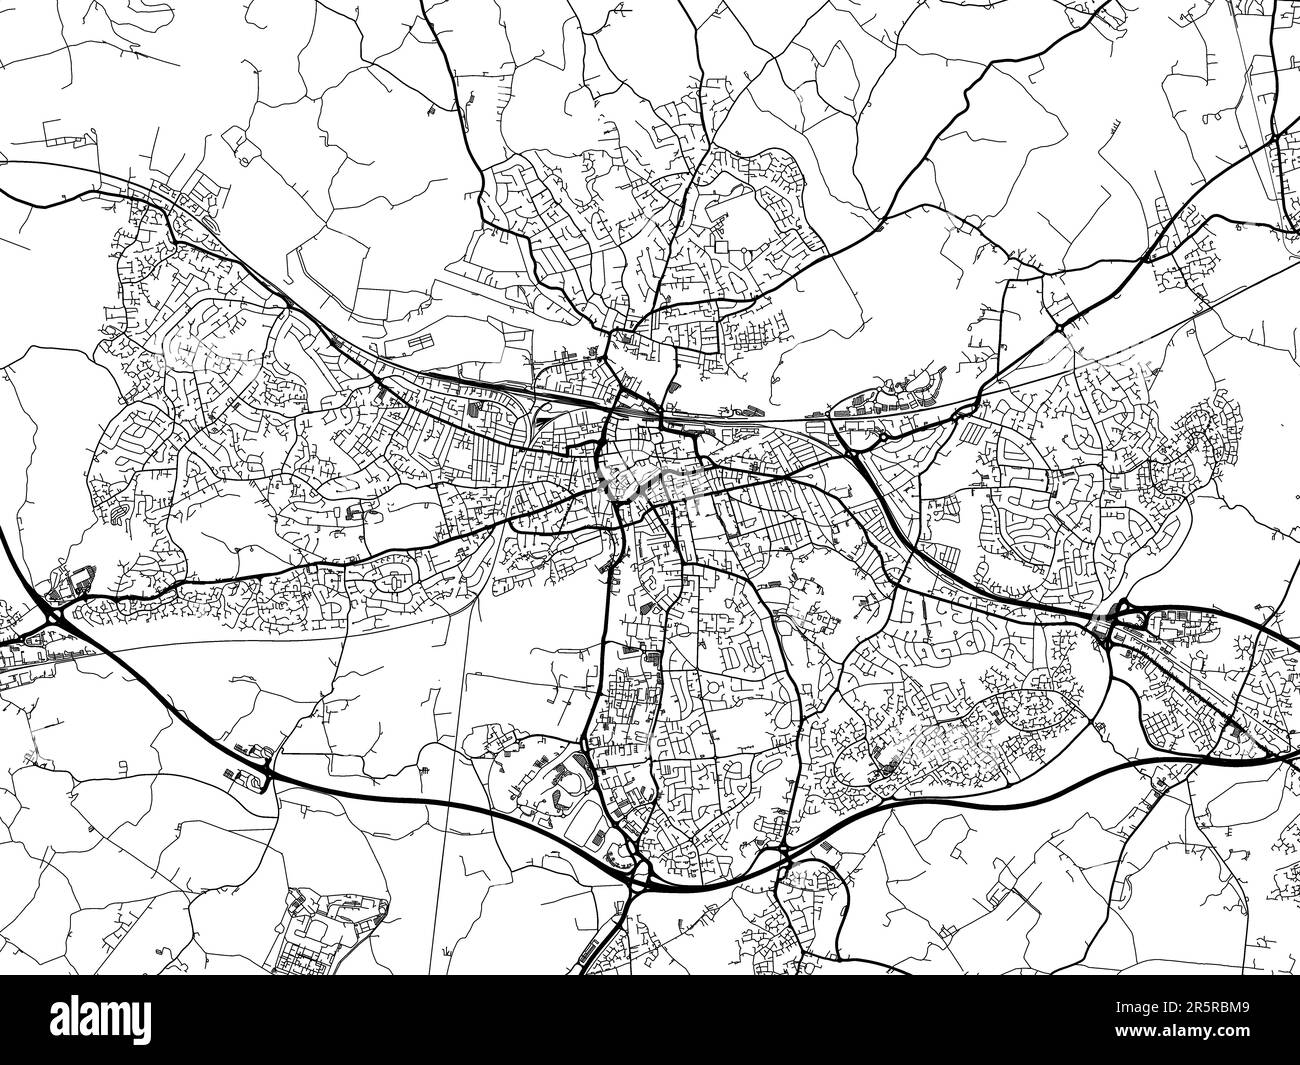 Road map of the city of  Reading in the United Kingdom on a white background. Stock Photo